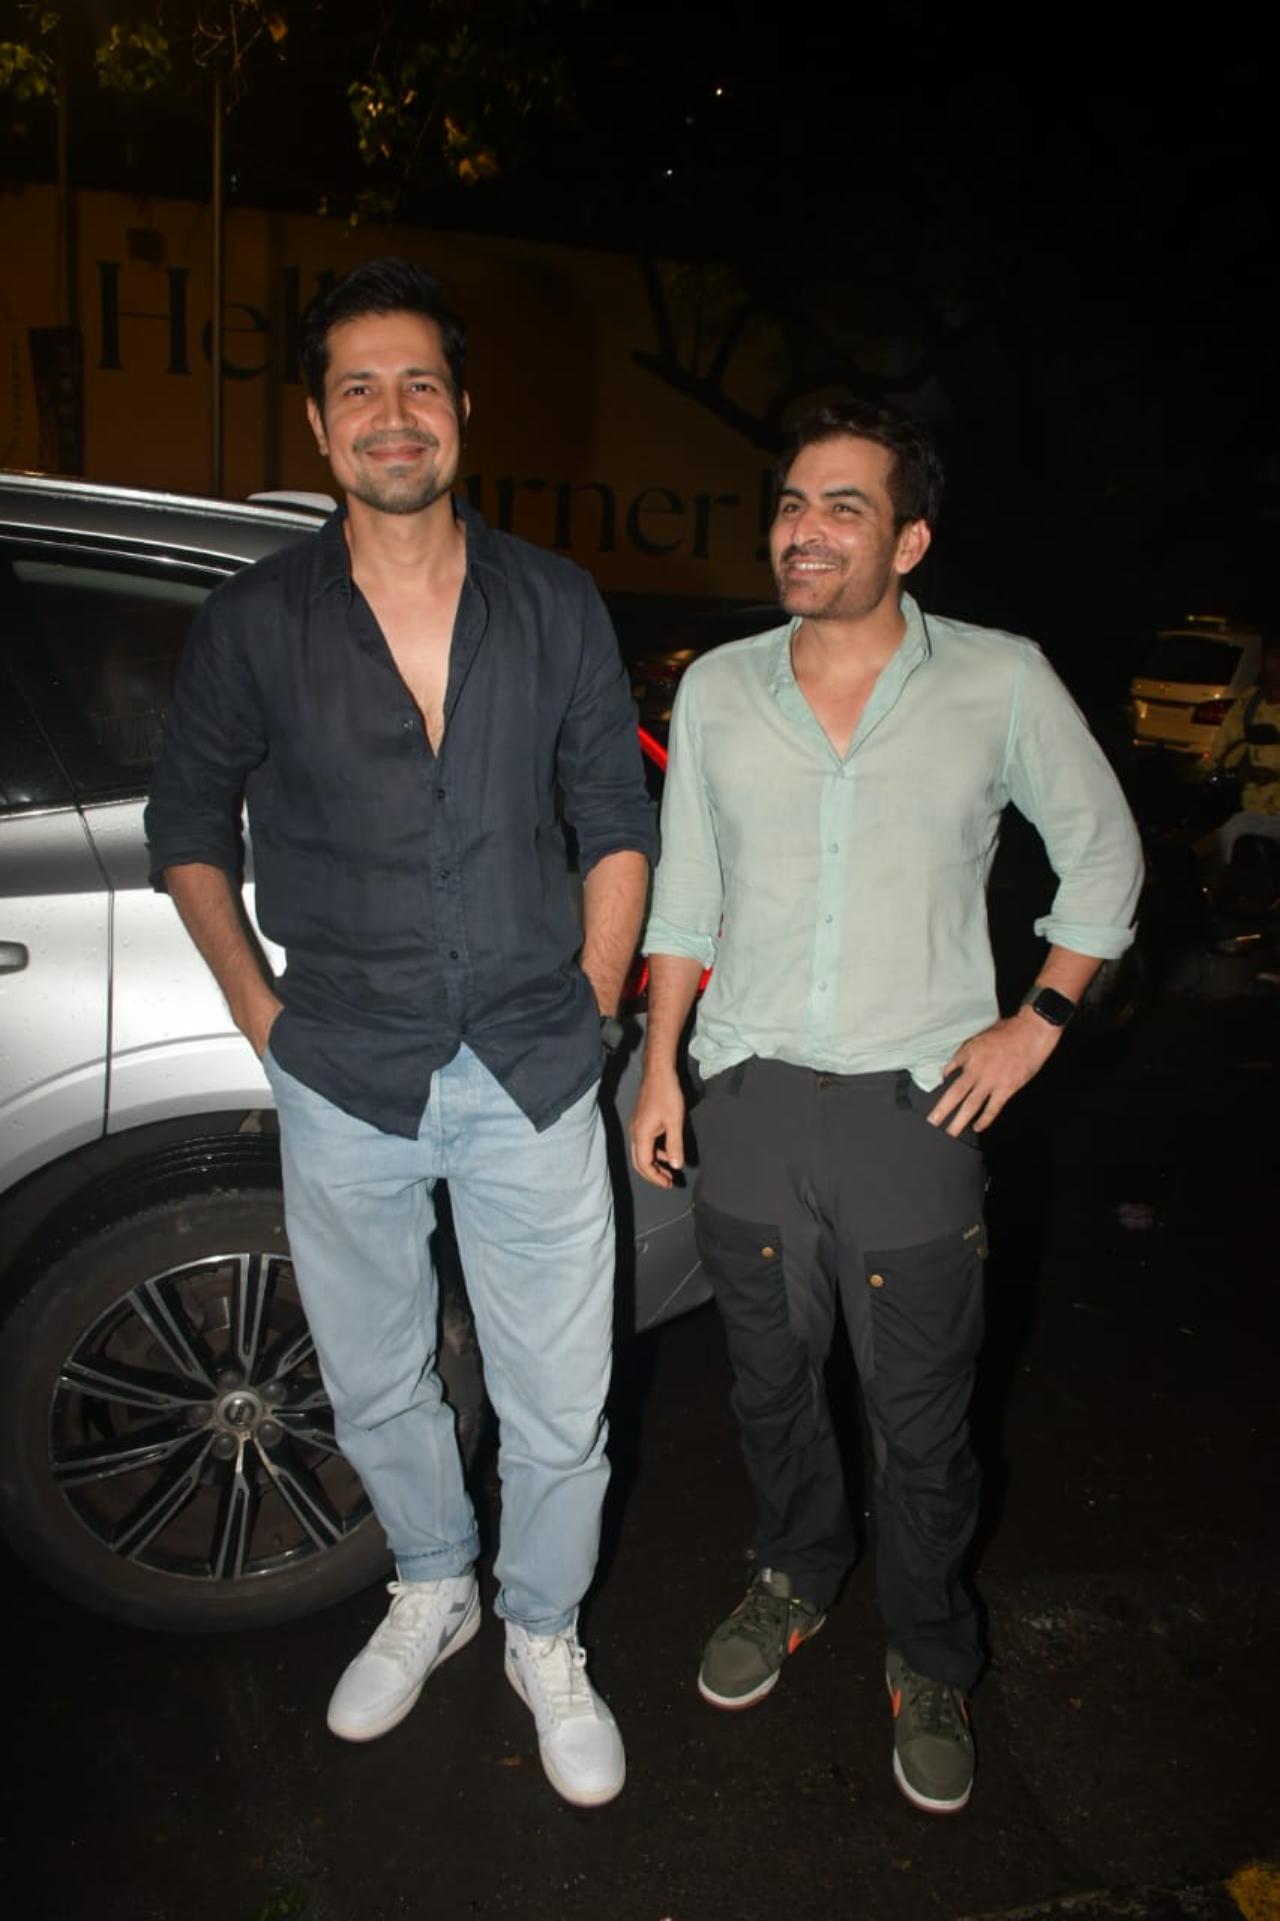 Manav Kaul and Sumeet Vyas posed together for the paparazzi. The two were in a jolly mood